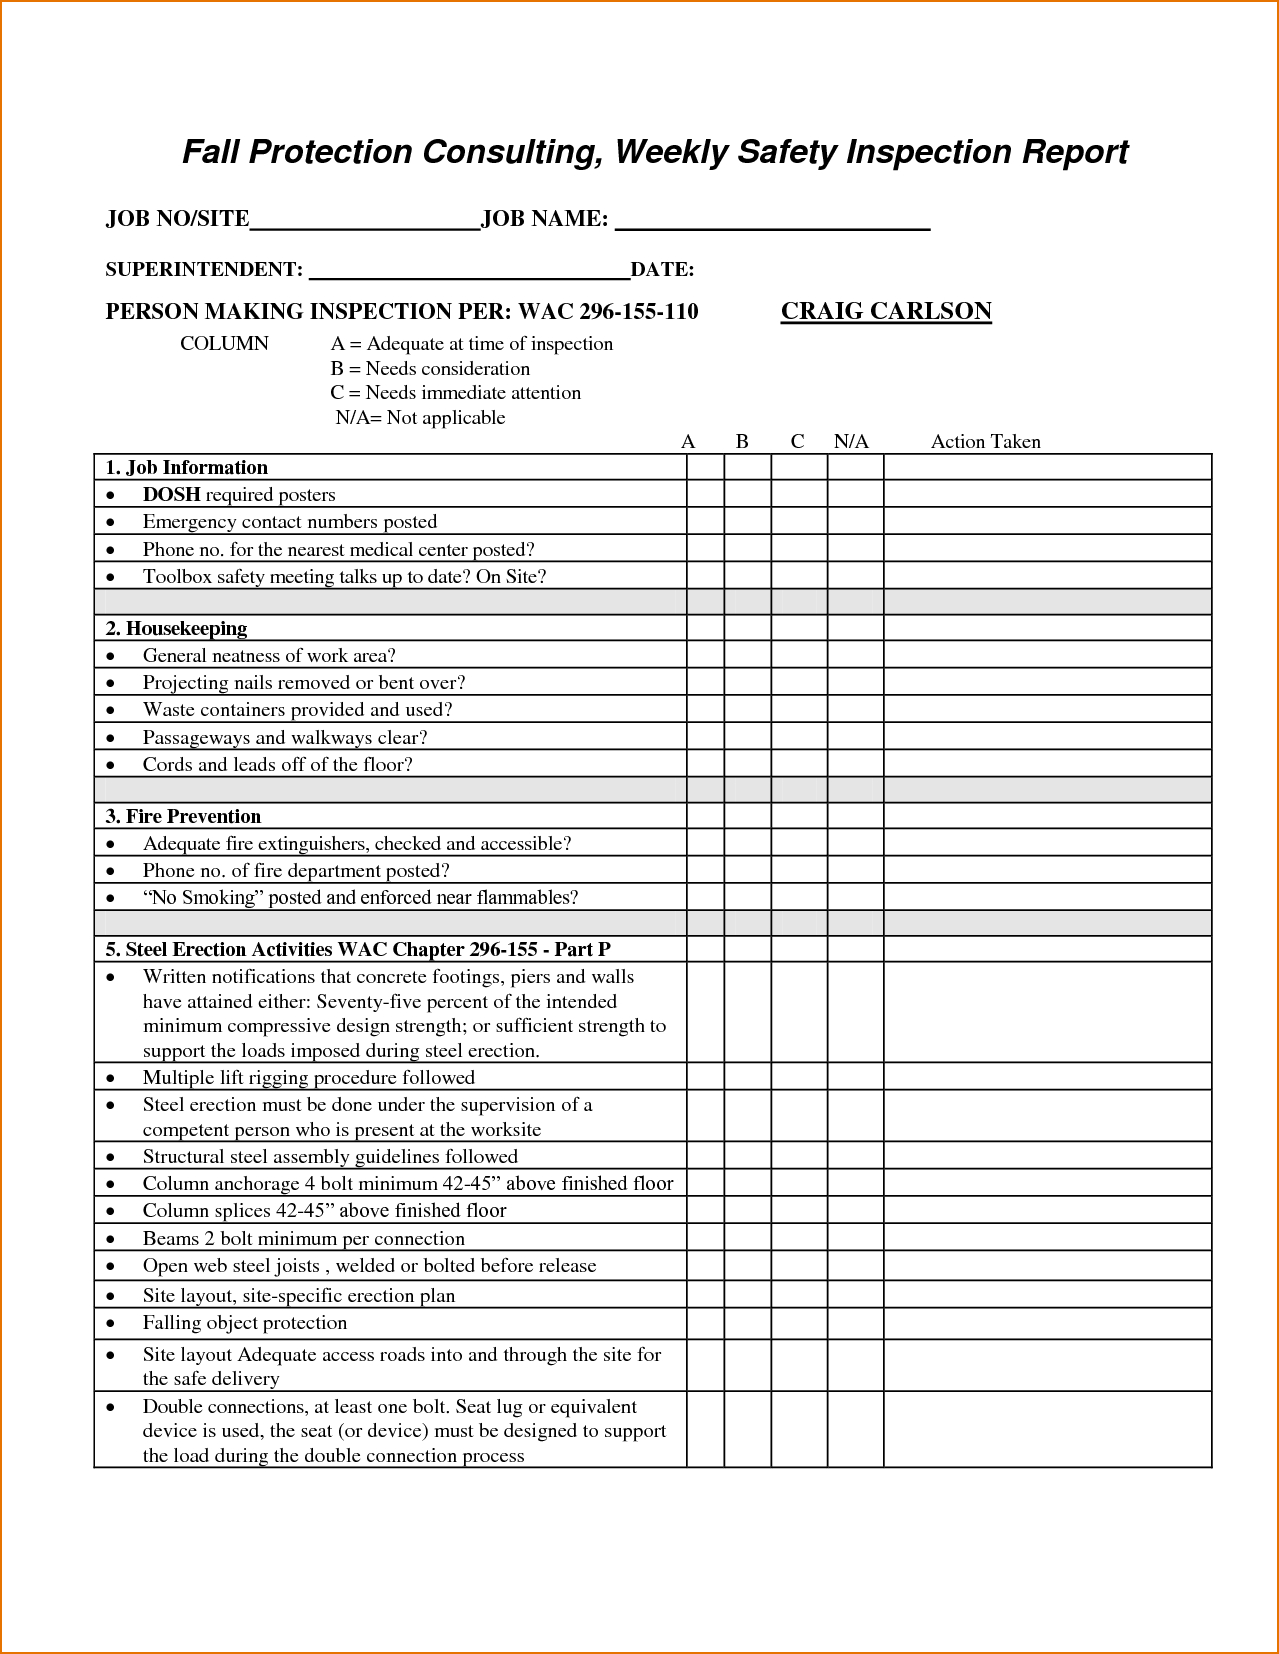 Home Inspection Report Template Pdf | Tagua Inside Home Inspection Report Template Pdf